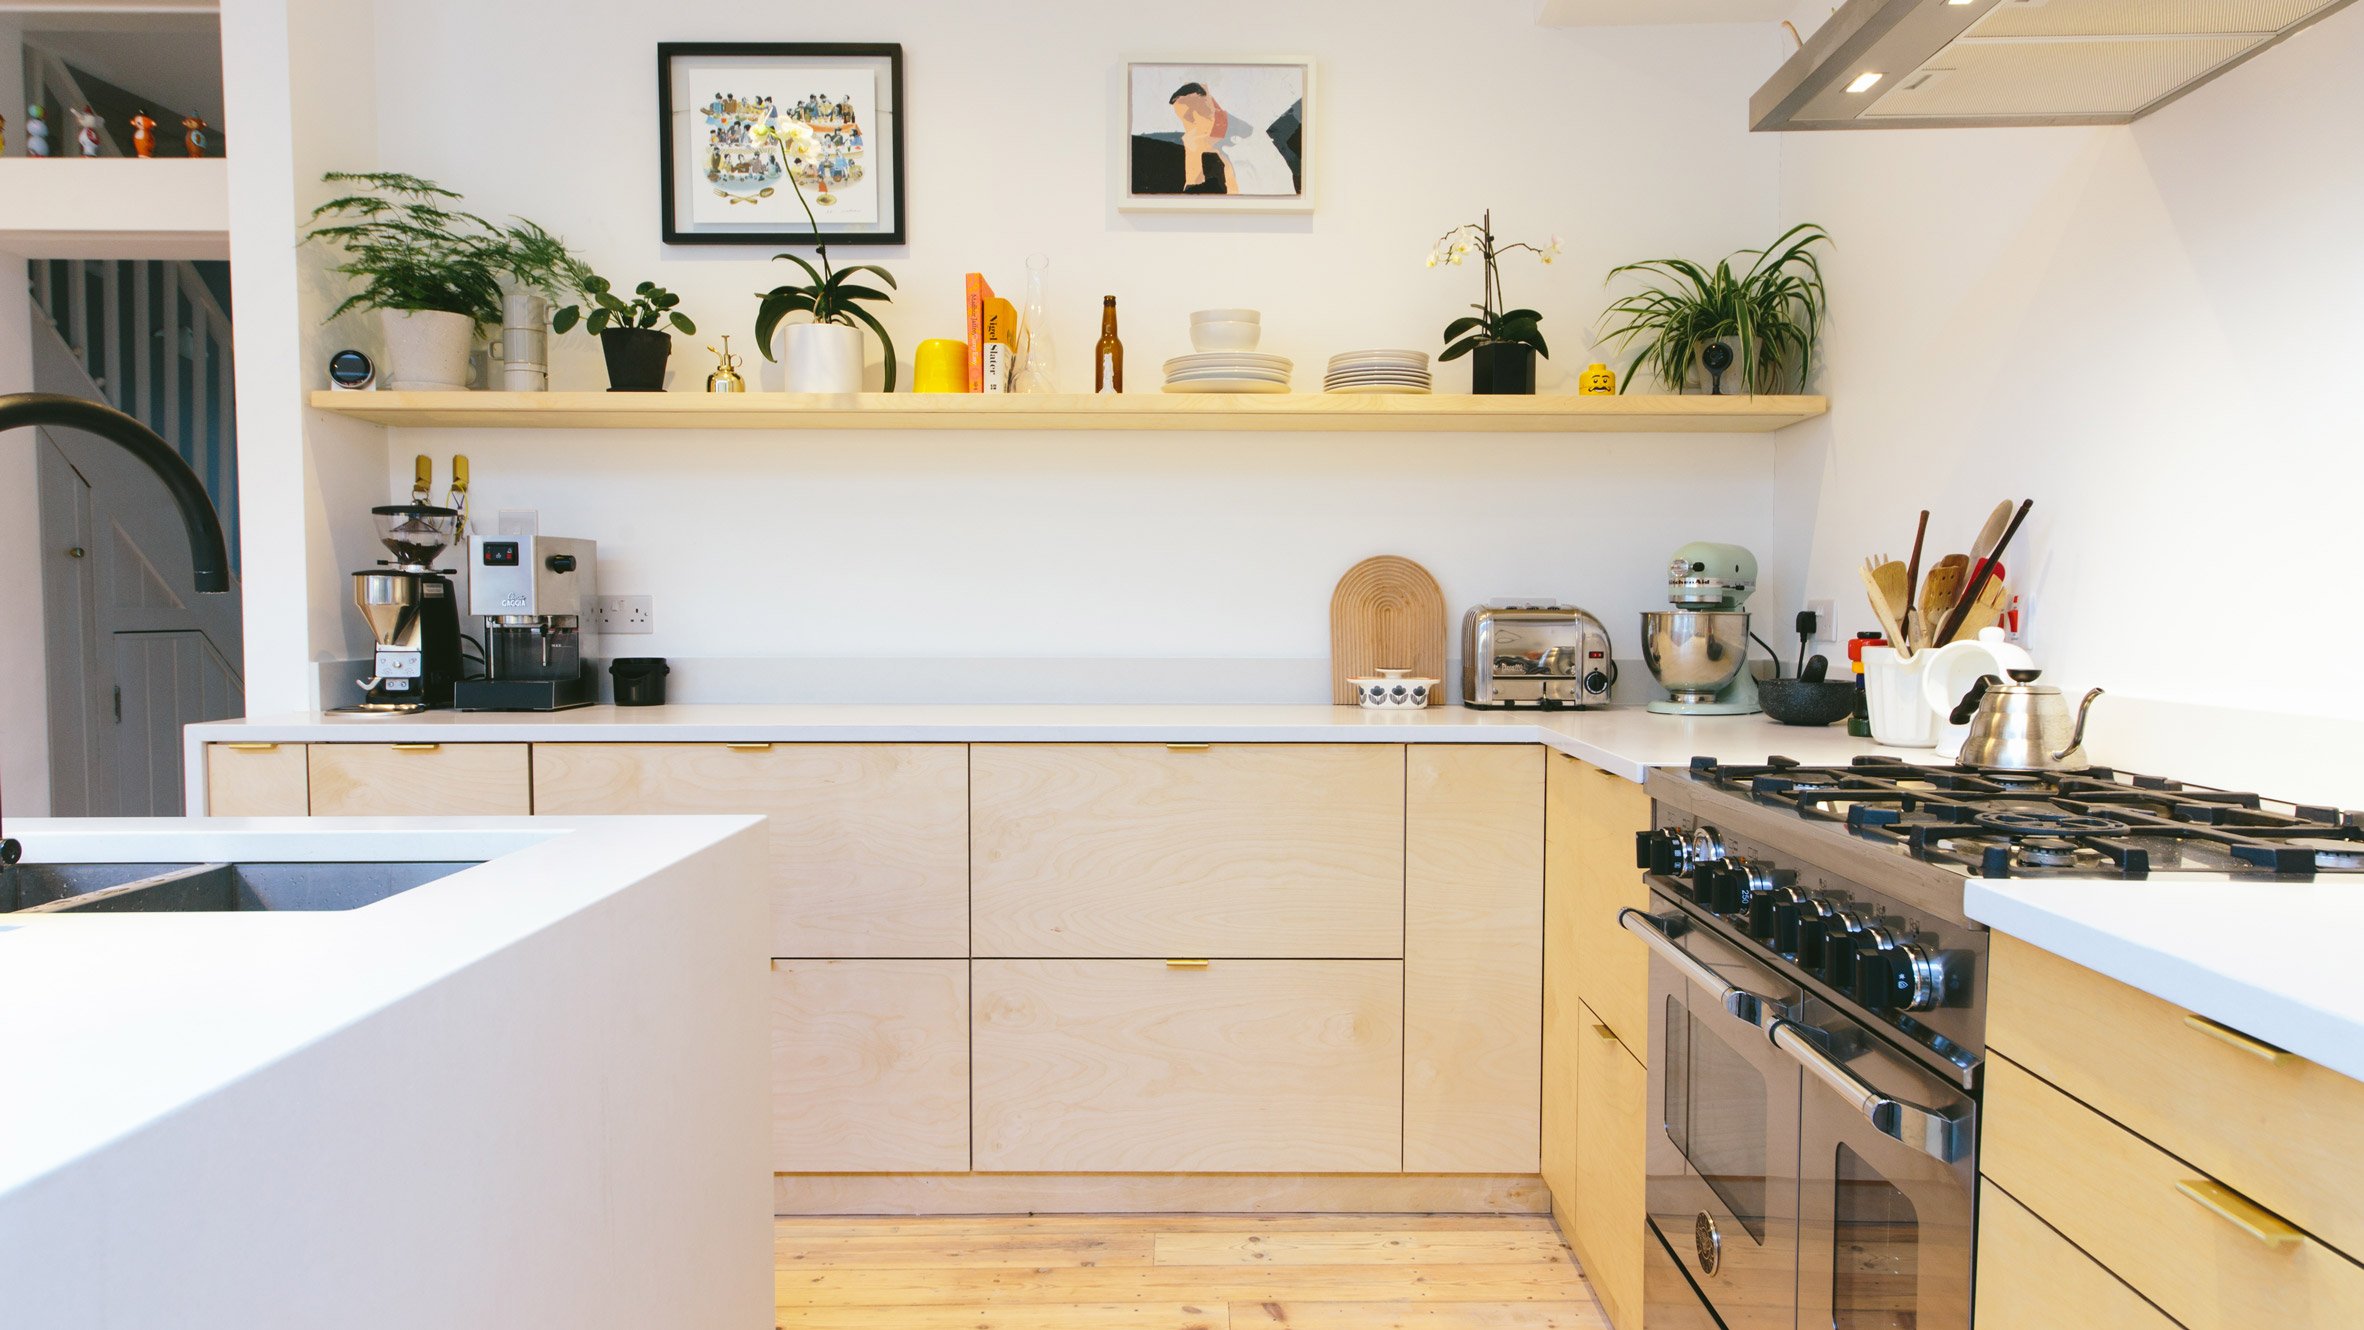 Plykea hacks IKEA's Metod kitchens with plywood fronts